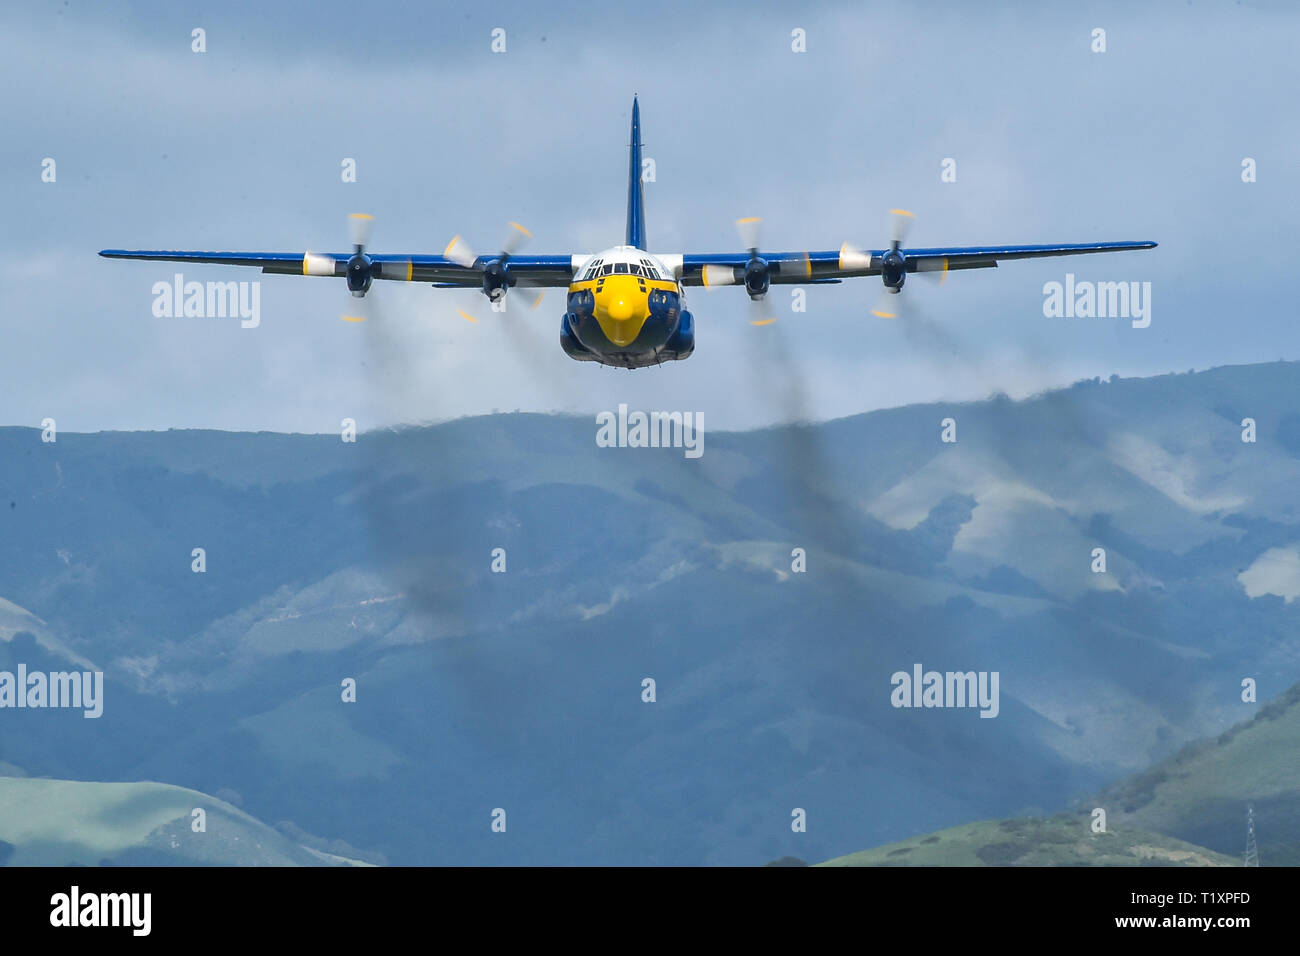 190323-N-UK306-1105 SALINAS, Calif. (March 23, 2019) U.S. Navy Flight  Demonstration Squadron, the Blue Angels, C-130 transport aircraft,  affectionately known as Fat Albert, flies during the California  International Airshow at the Salinas Municipal